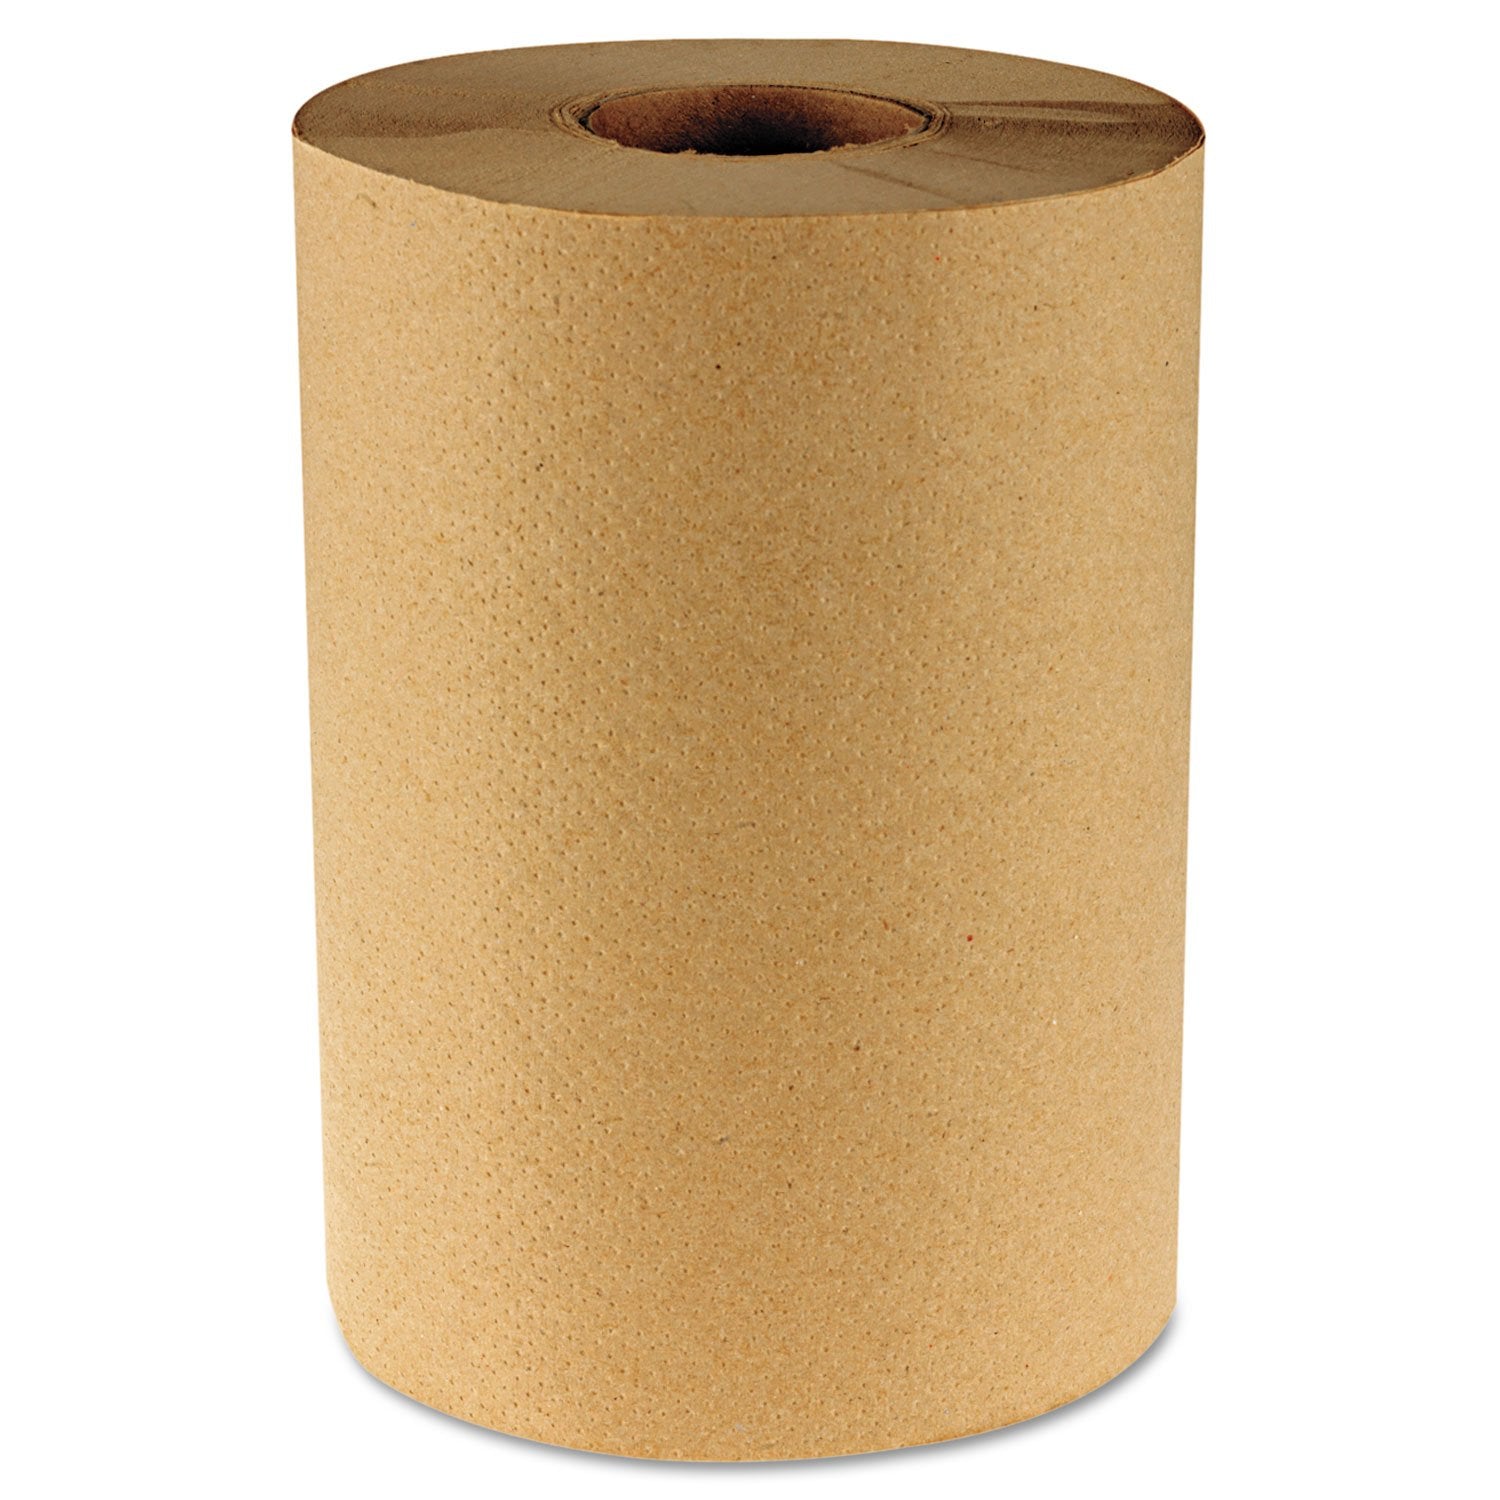 Bathroom Paper Products: Toilet Paper